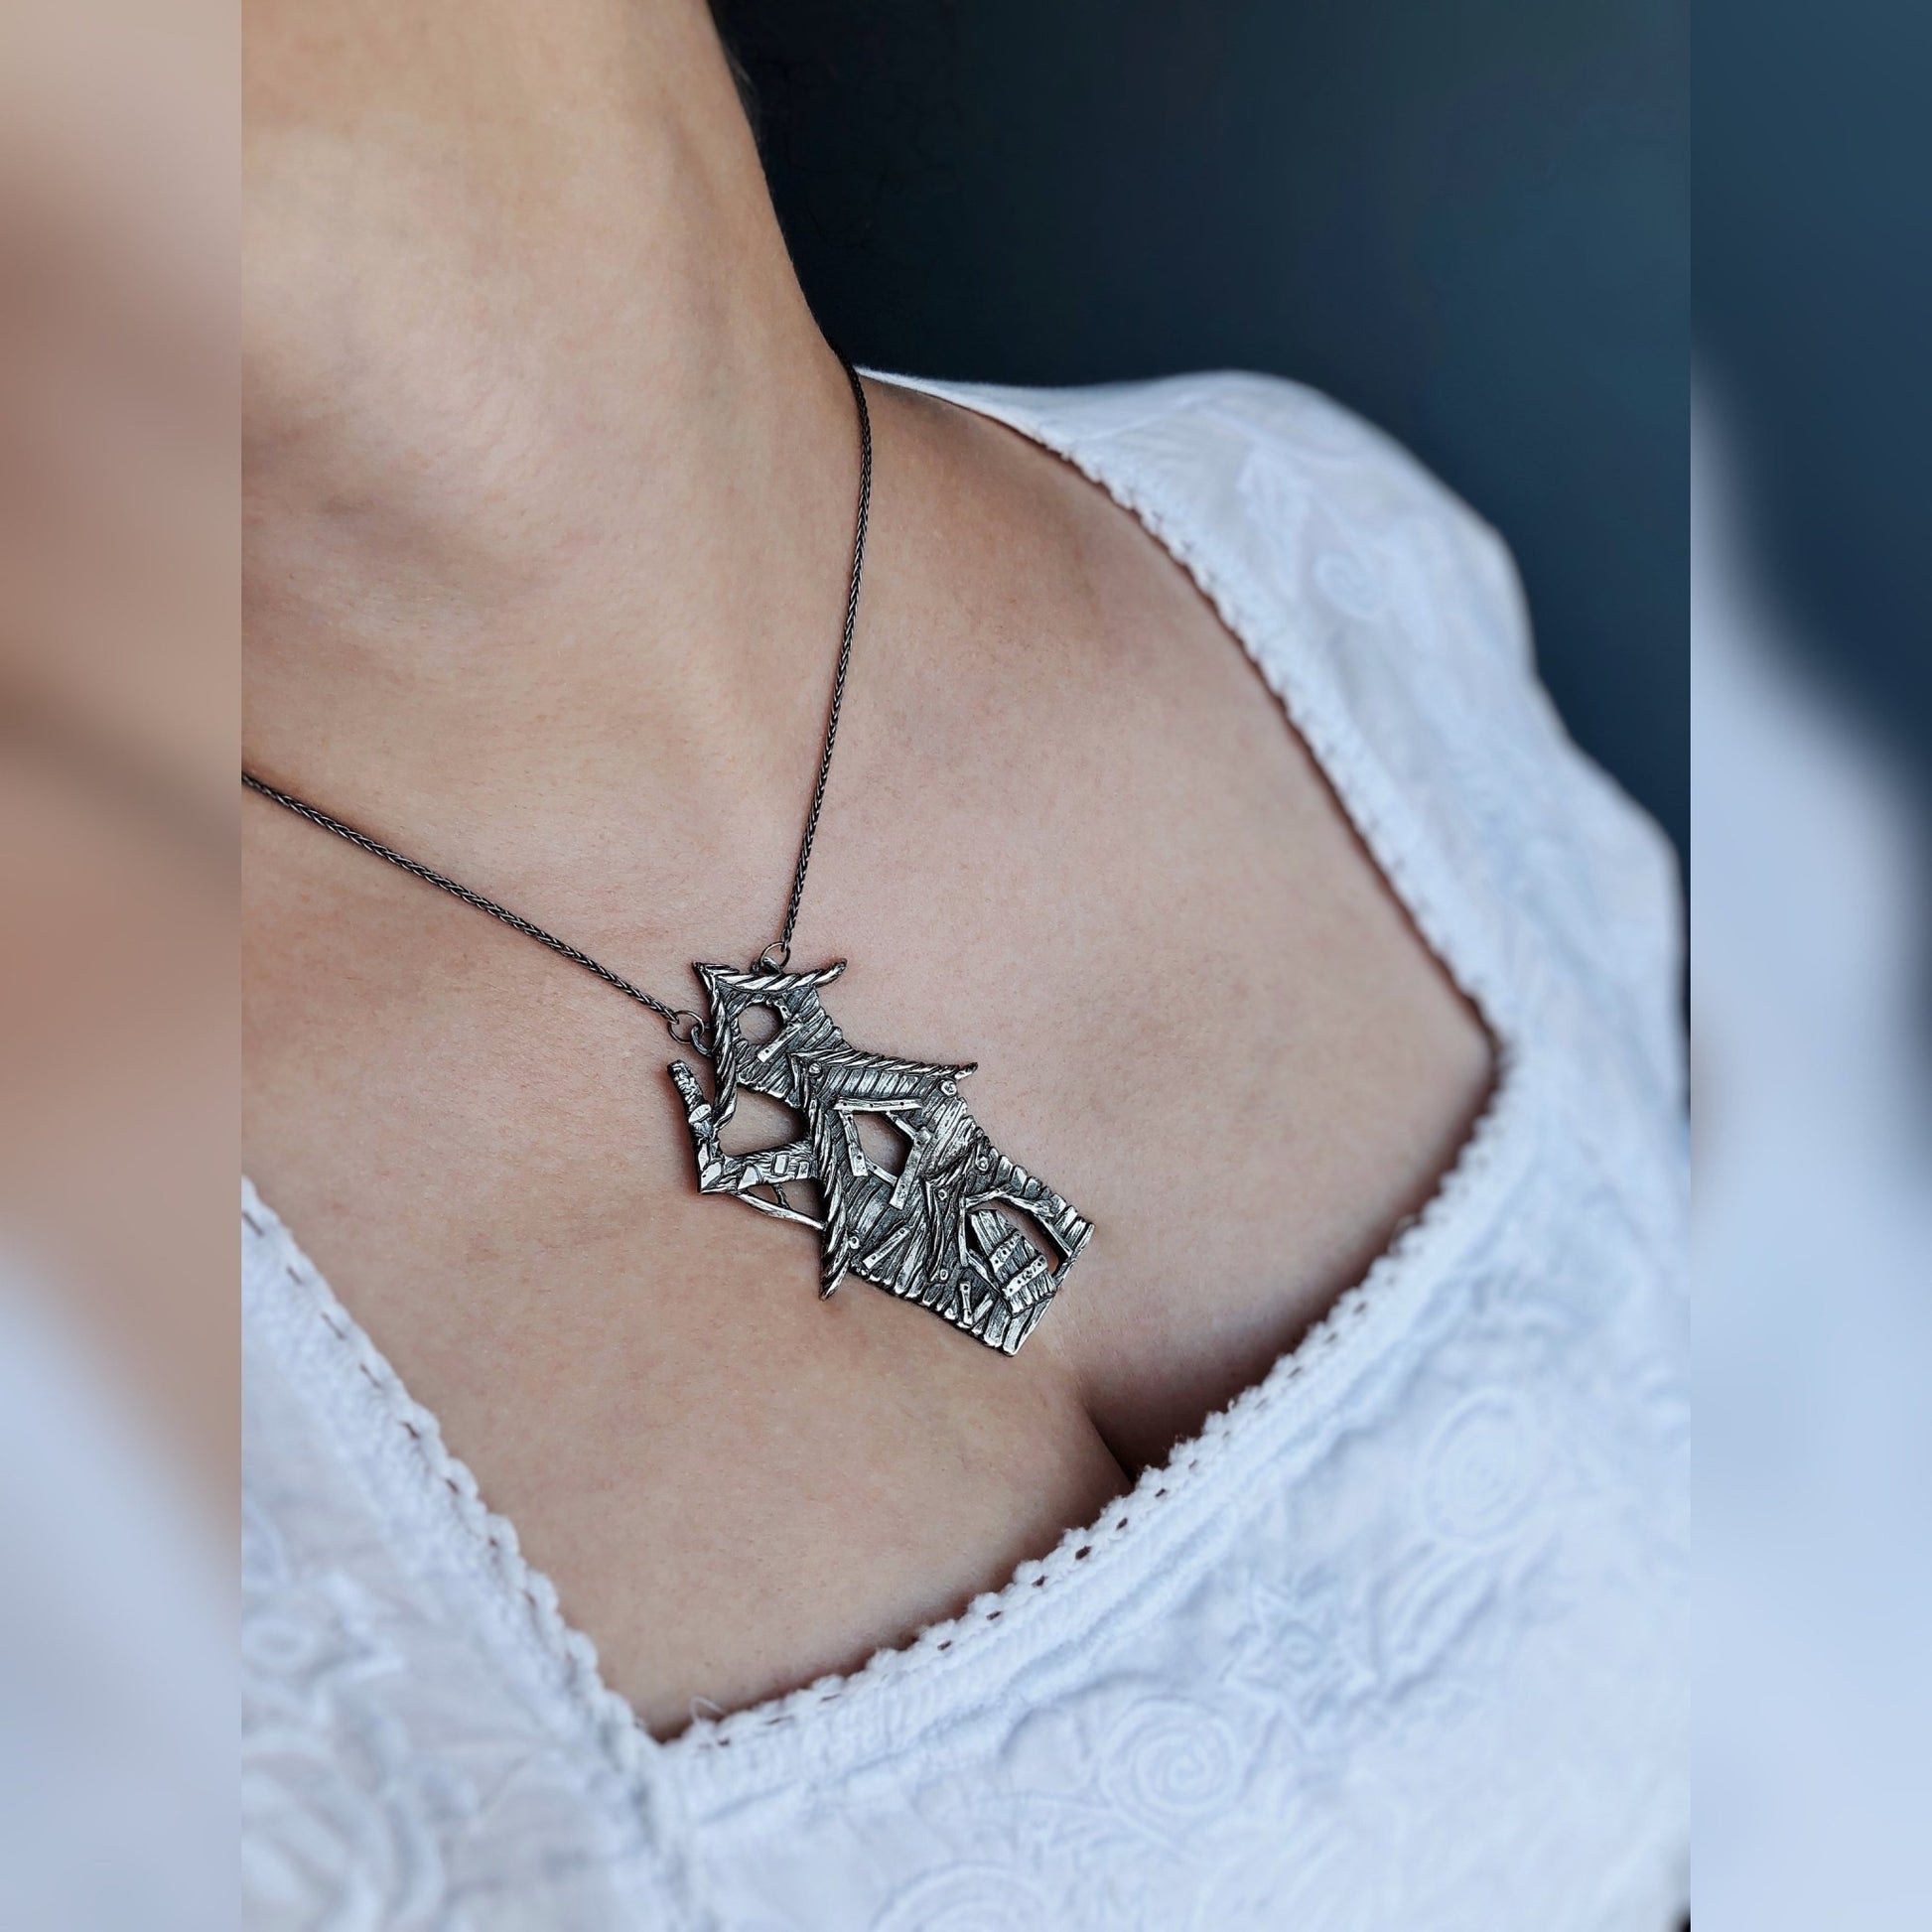 Haunted House Necklace, Sterling Silver, Artisan Made, Halloween Jewelry, Gothic, Witchy, Statement Jewelry